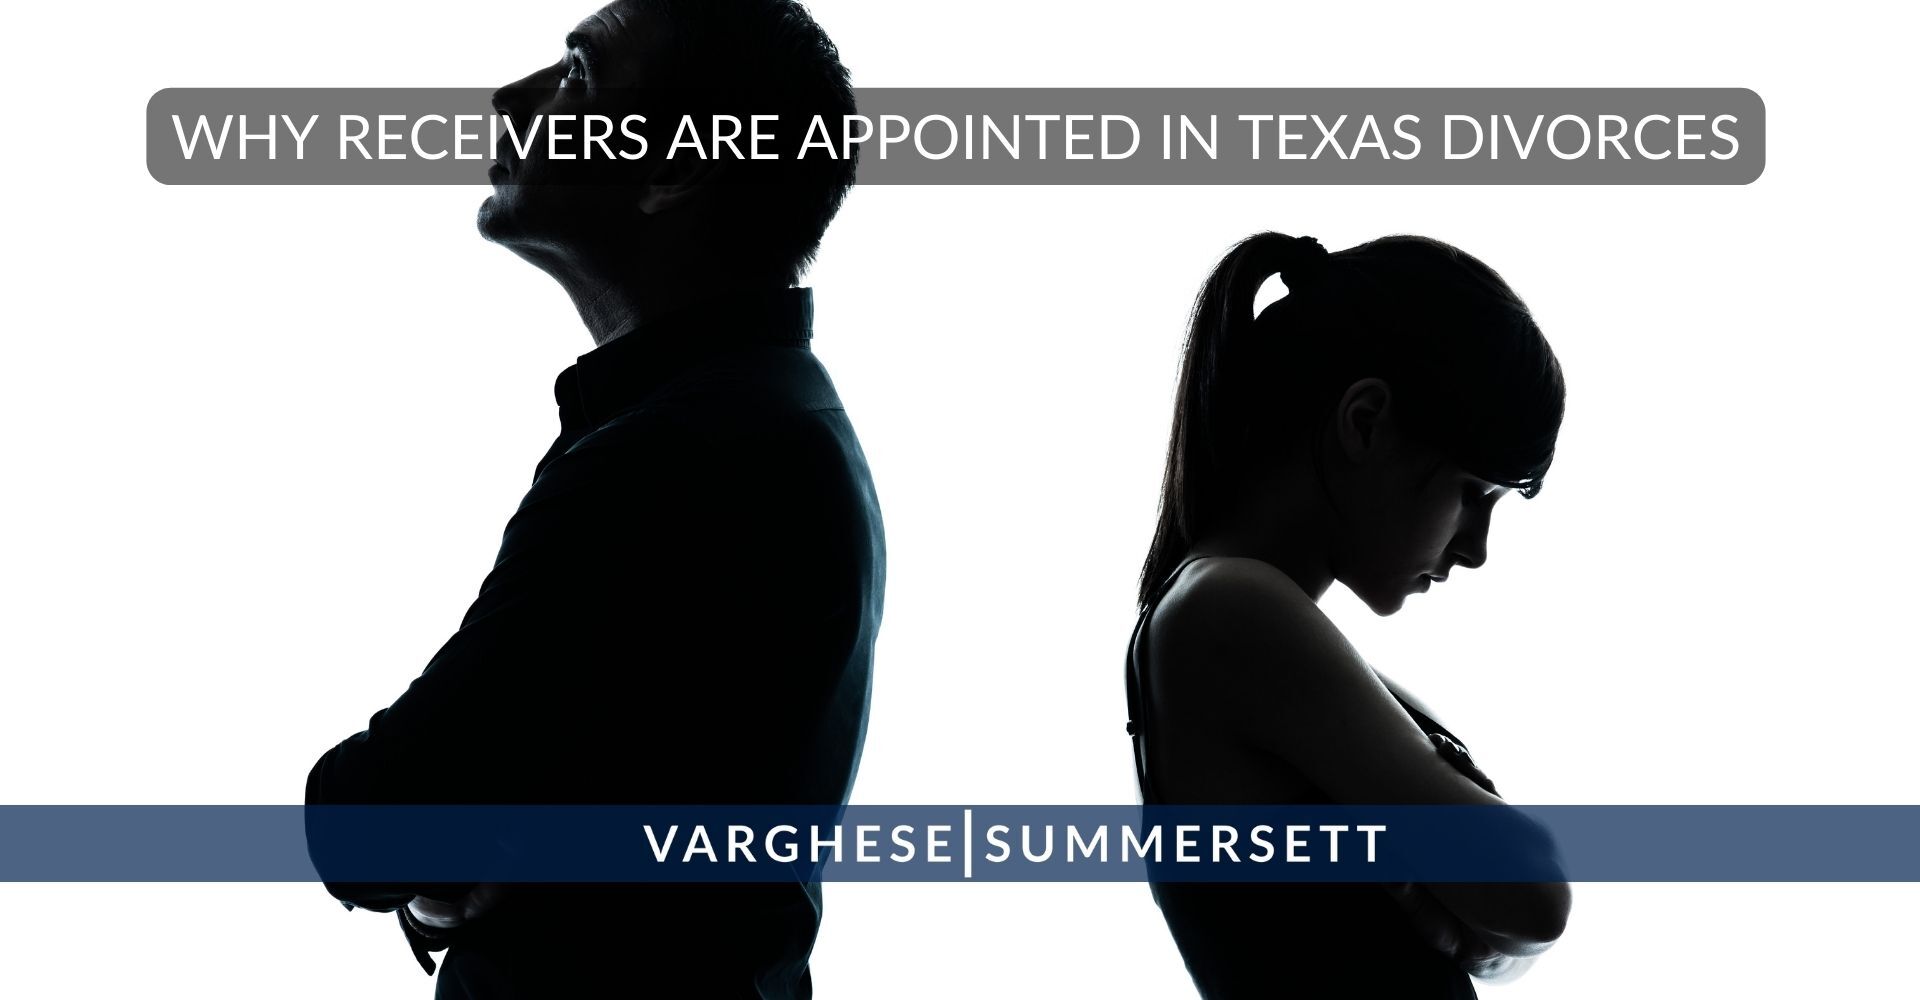 When divorce receivers are appointed in Texas divorces